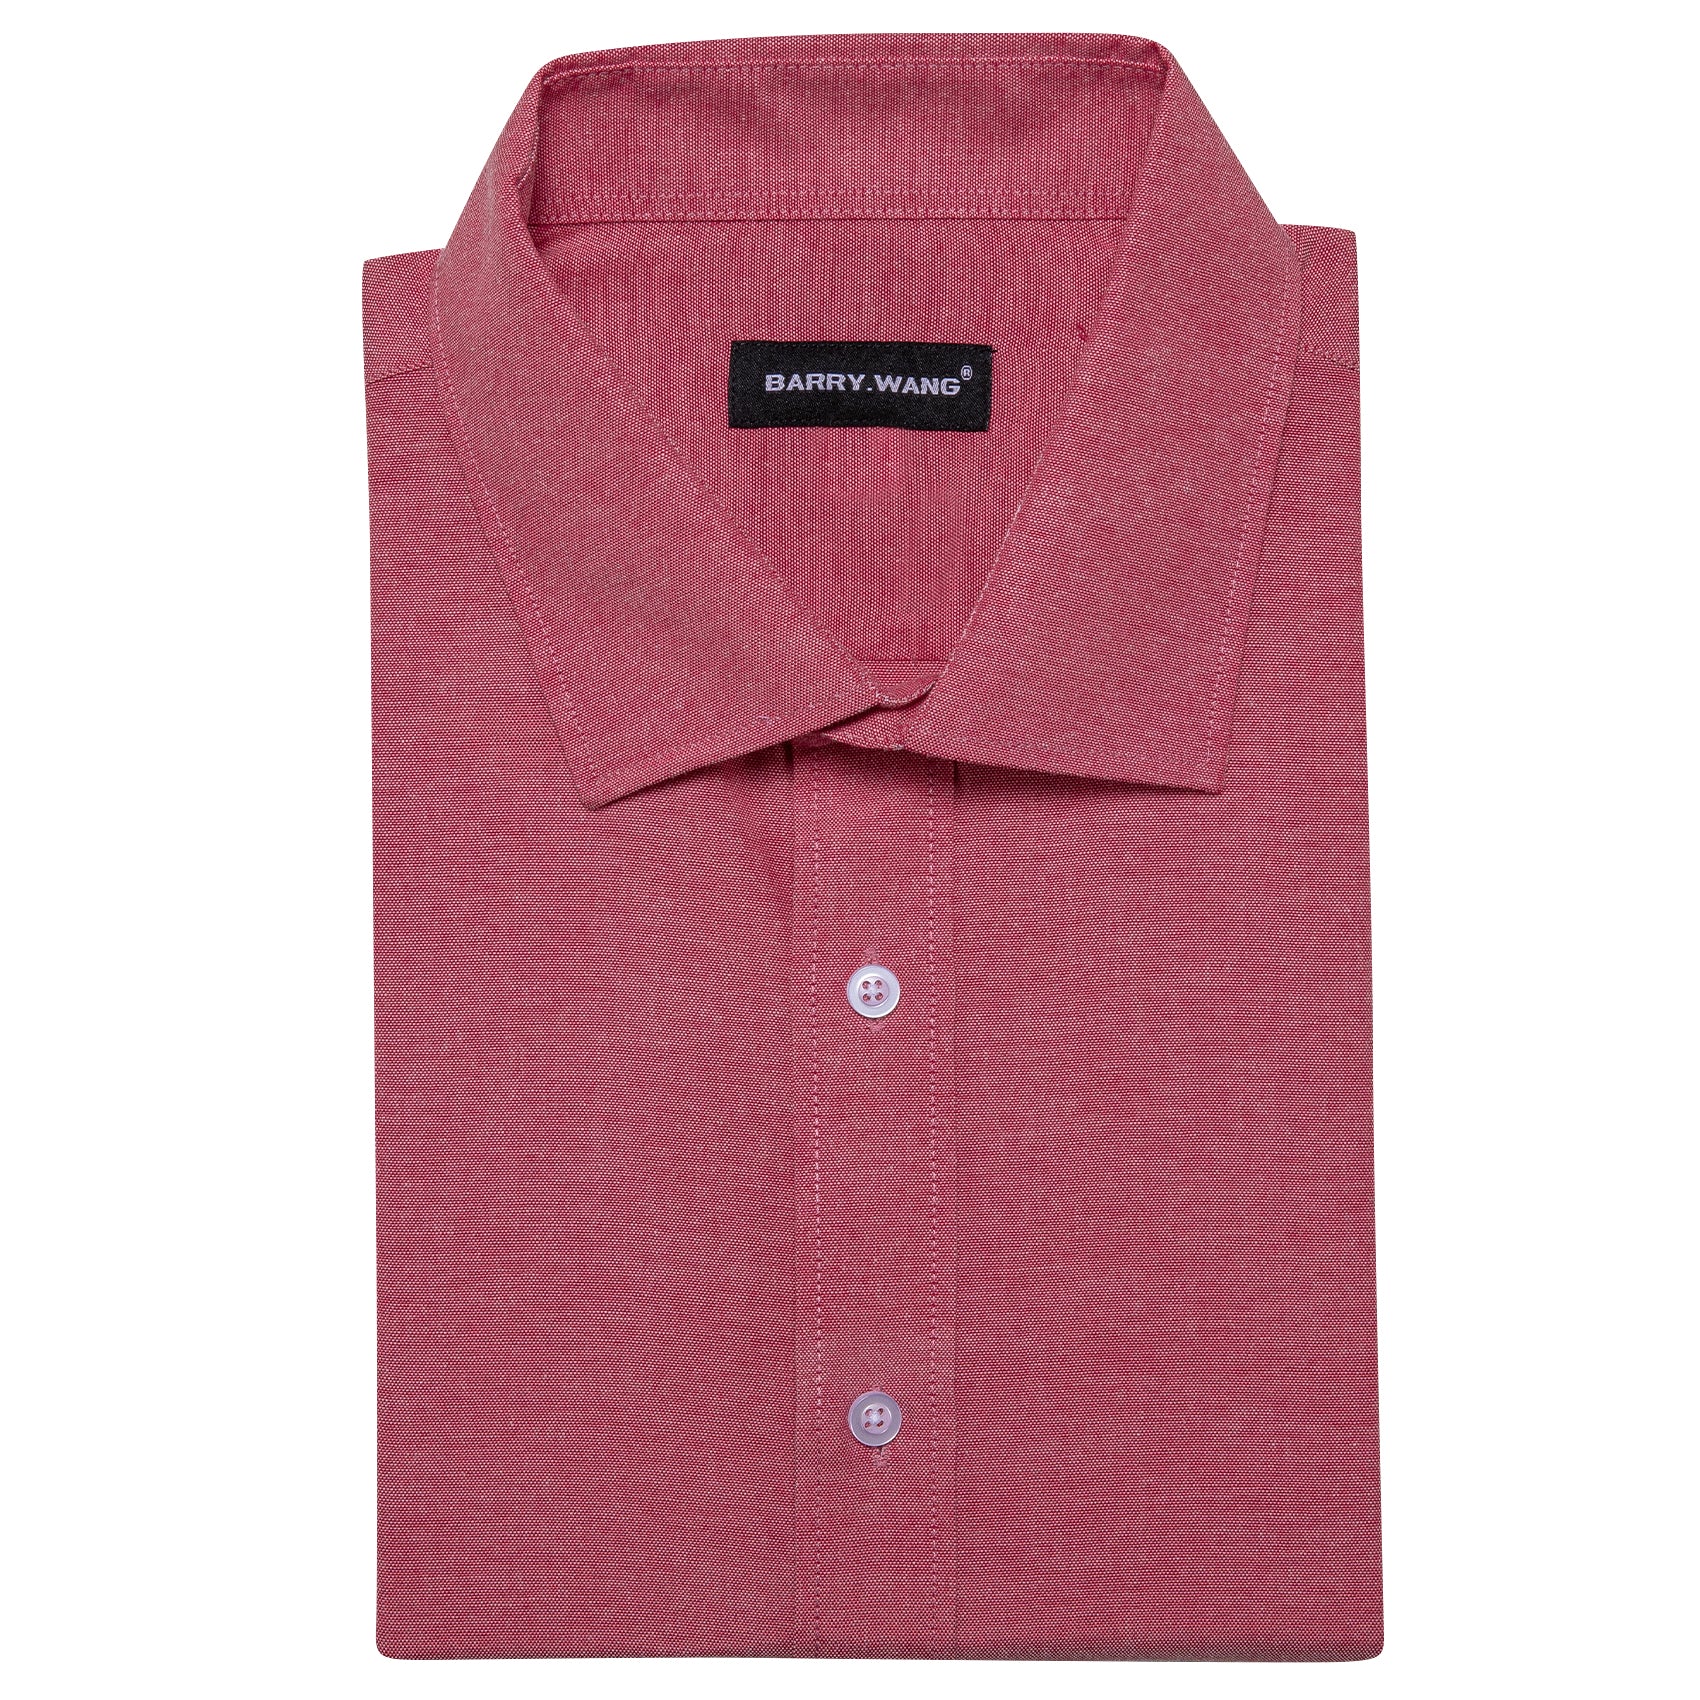 Barry.wang Indian Red Solid Silk Shirt